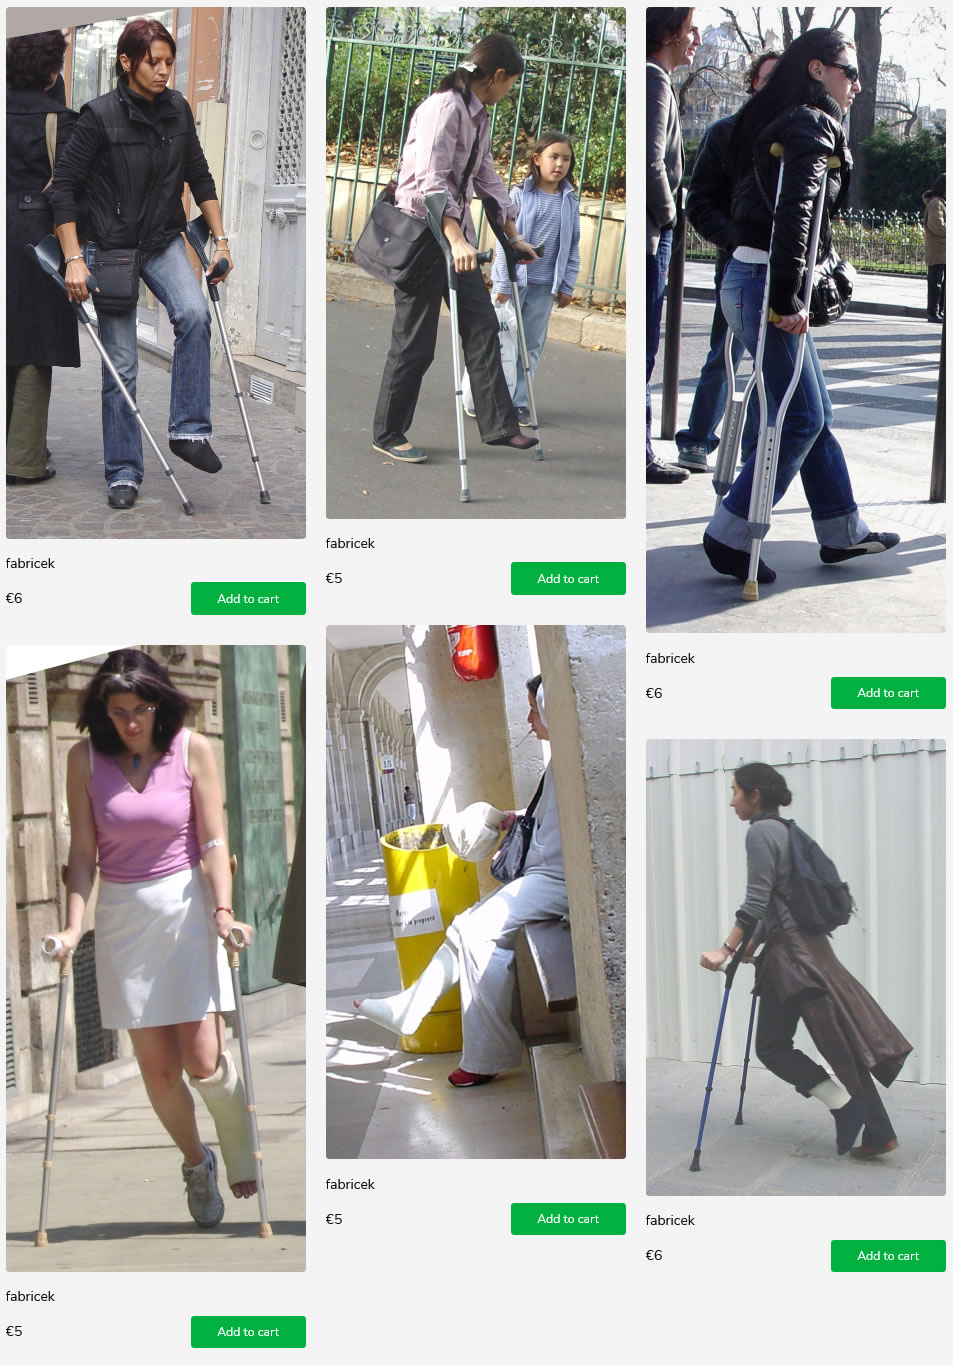 6 sets of women with legcasts and crutches